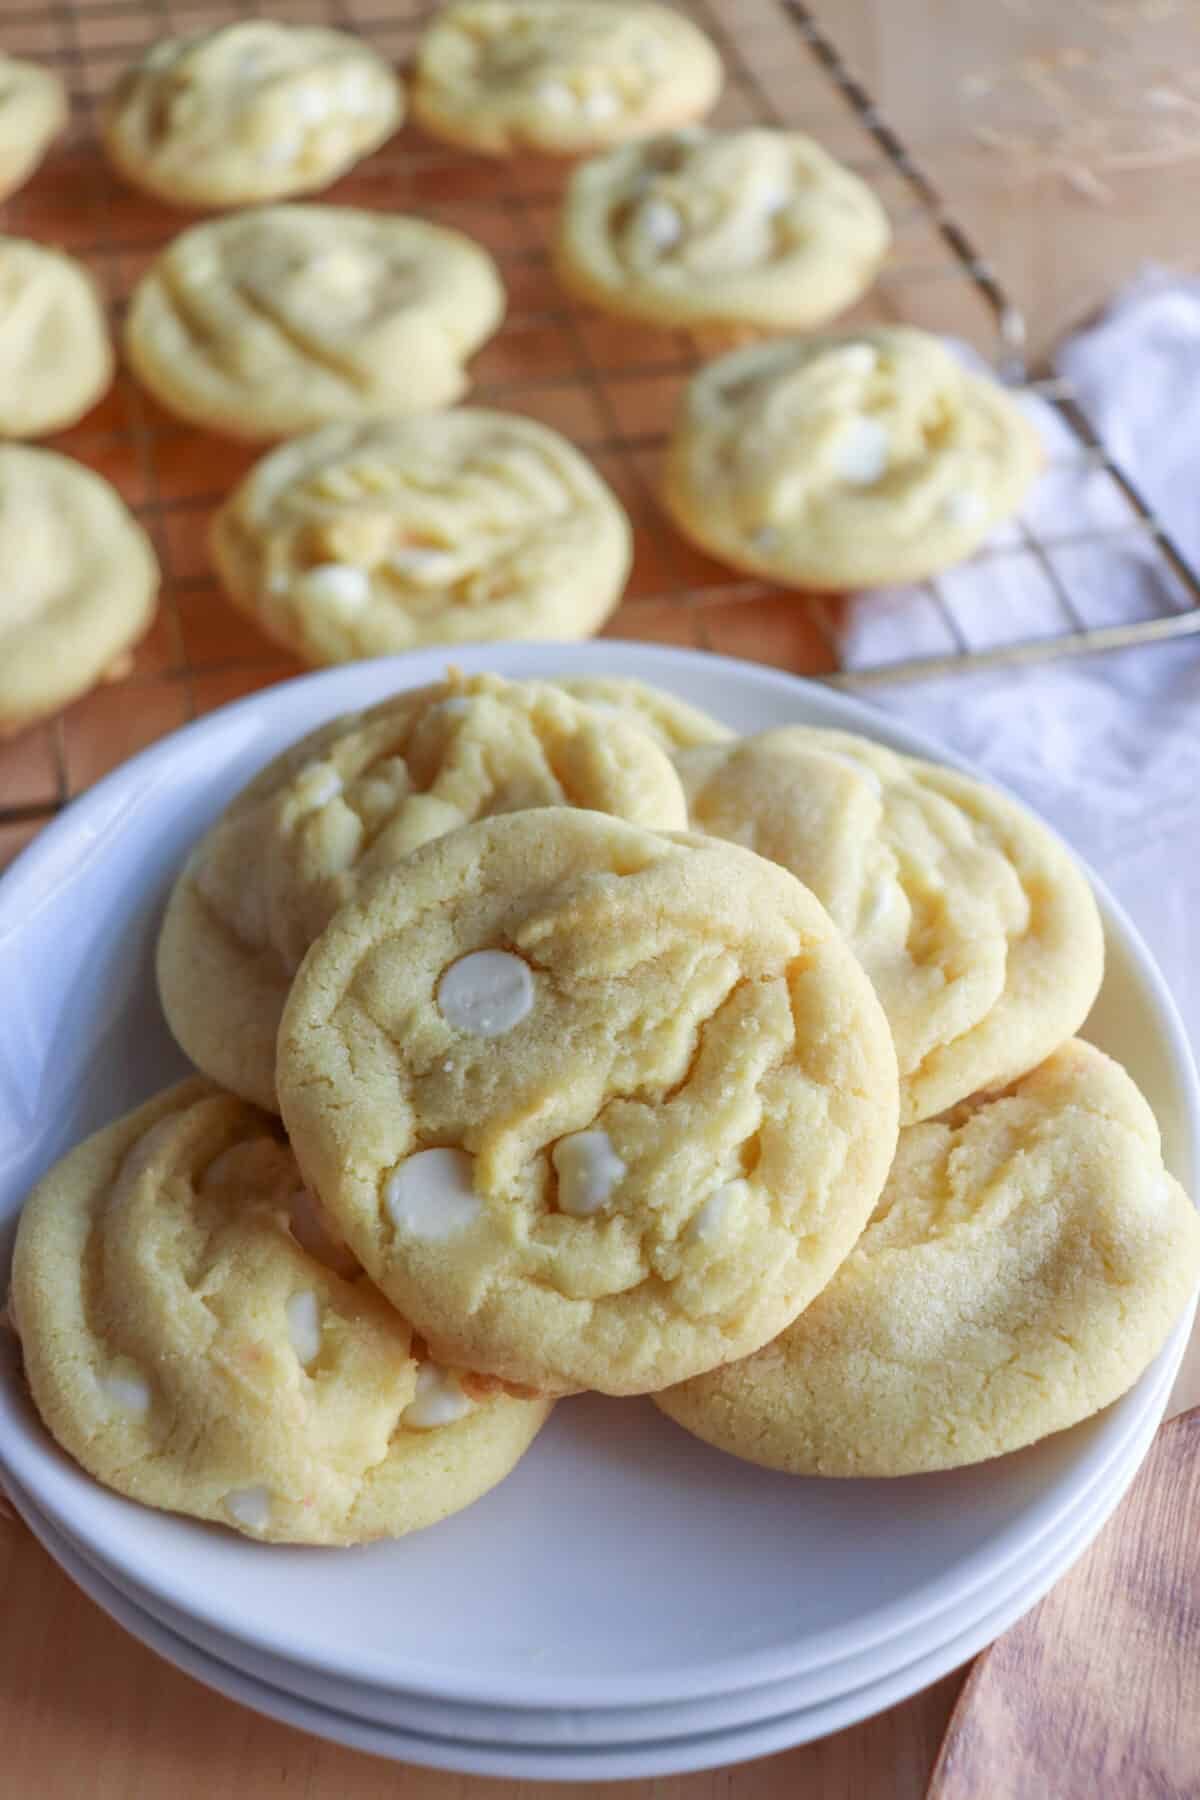 Yellow lemon cookies with white chocolate chips on a white plate.